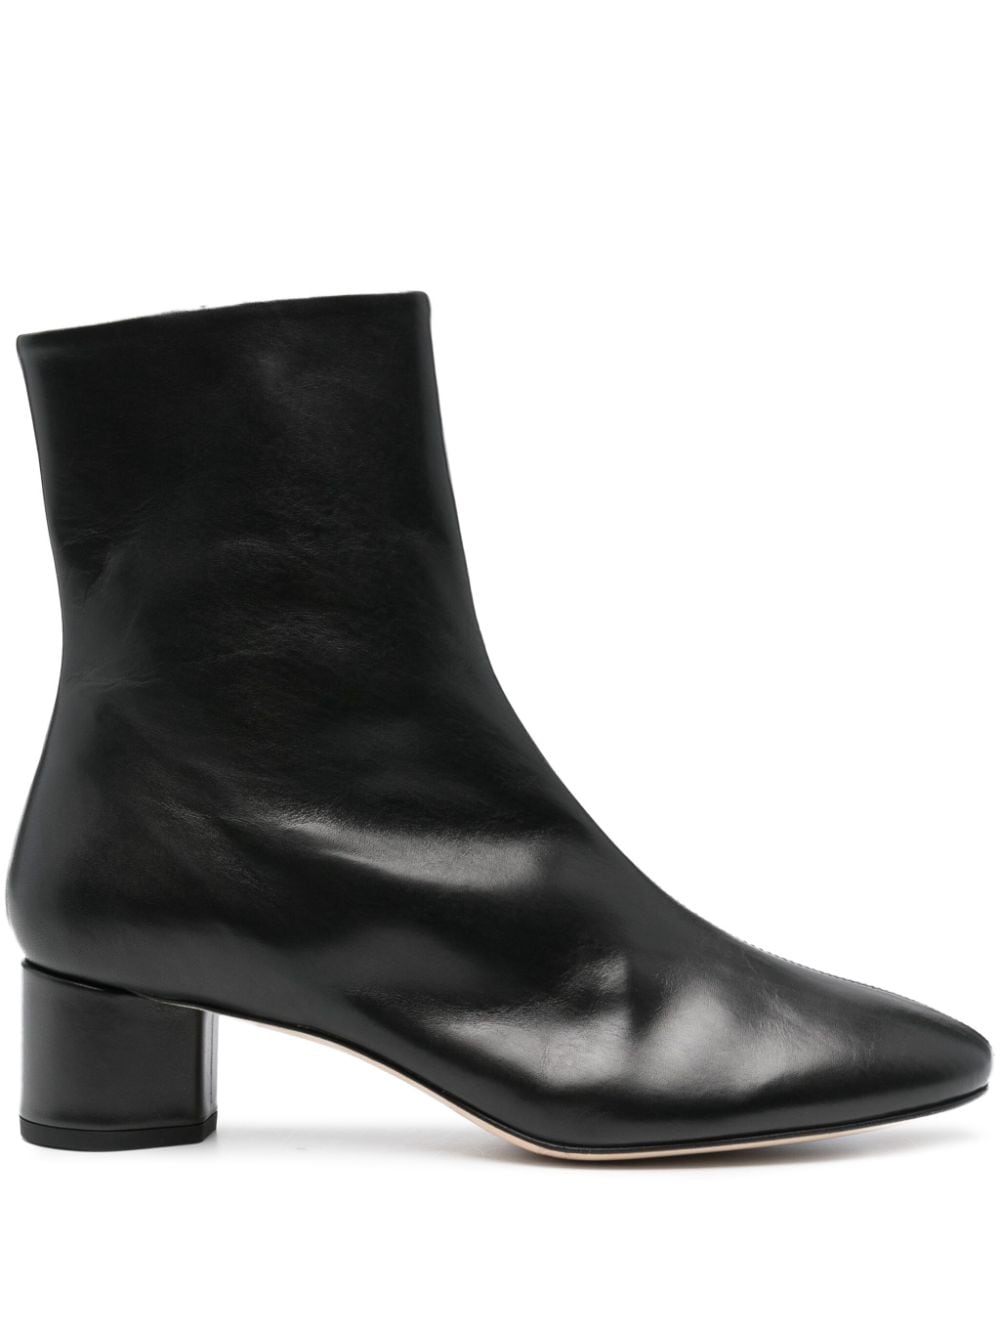 Aeyde leather ankle boots - Black von Aeyde